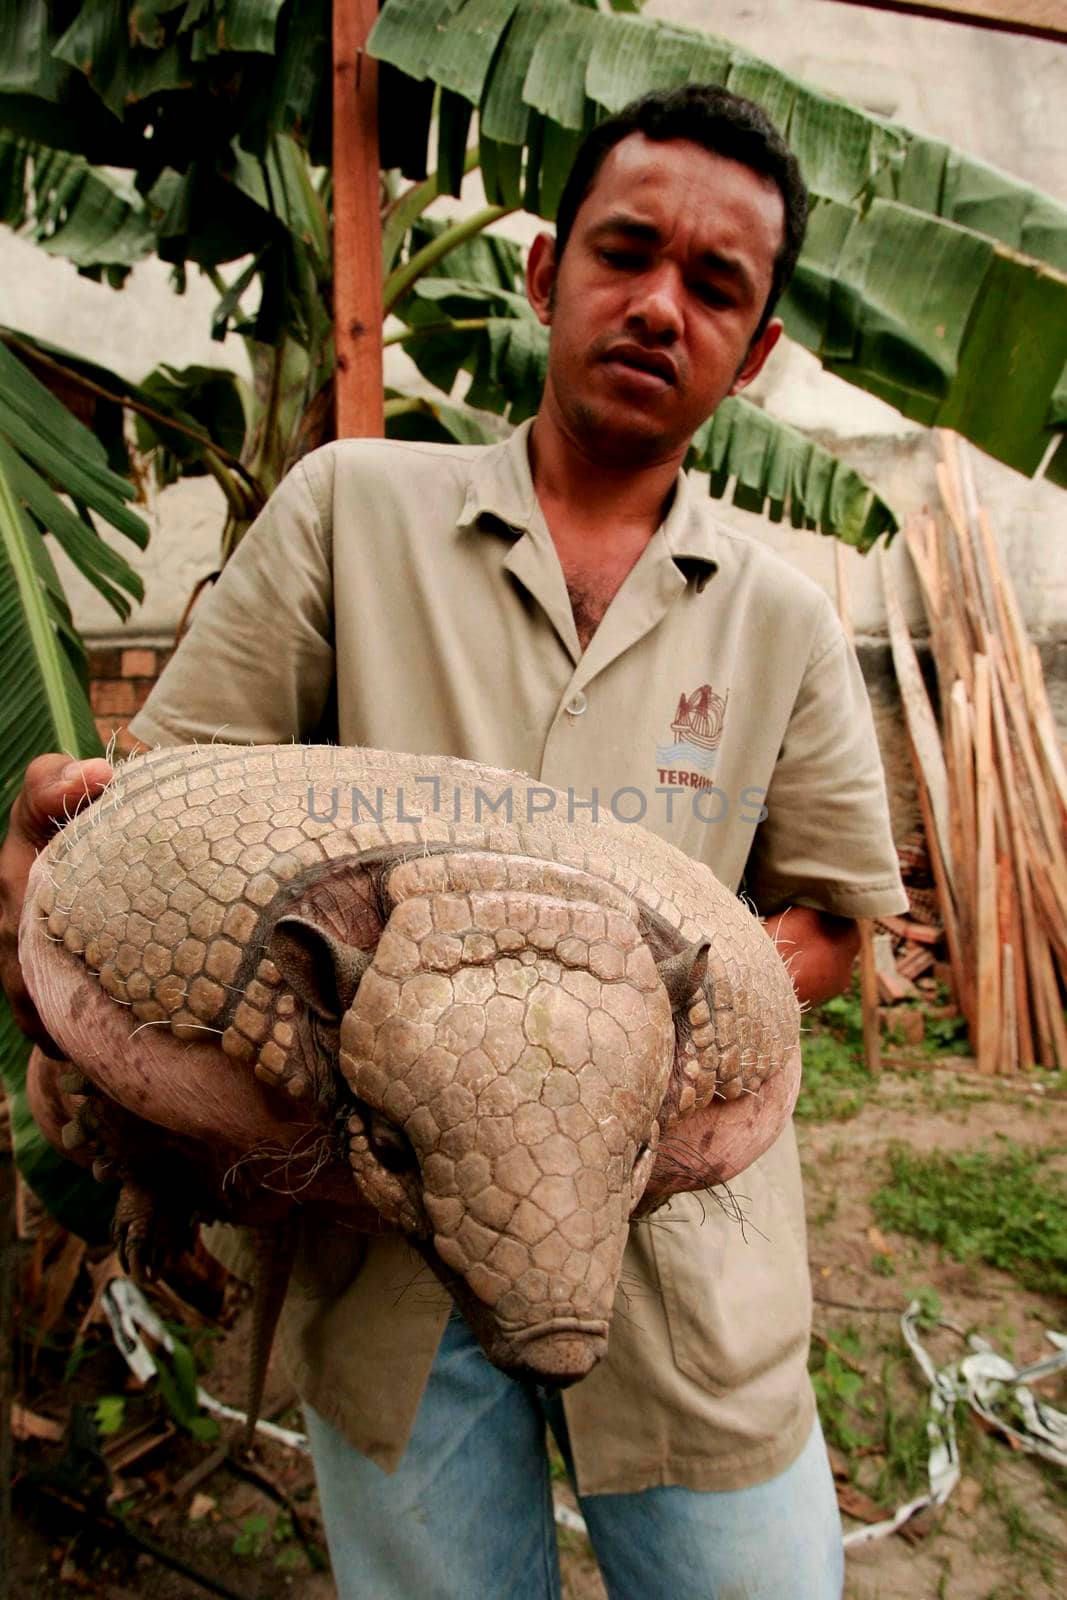 eunapolis, bahia / brazil - december 1, 2009: Armadillo peba weighing 16 kg is seen in the hands of a breeder in the city of Eunapolis.